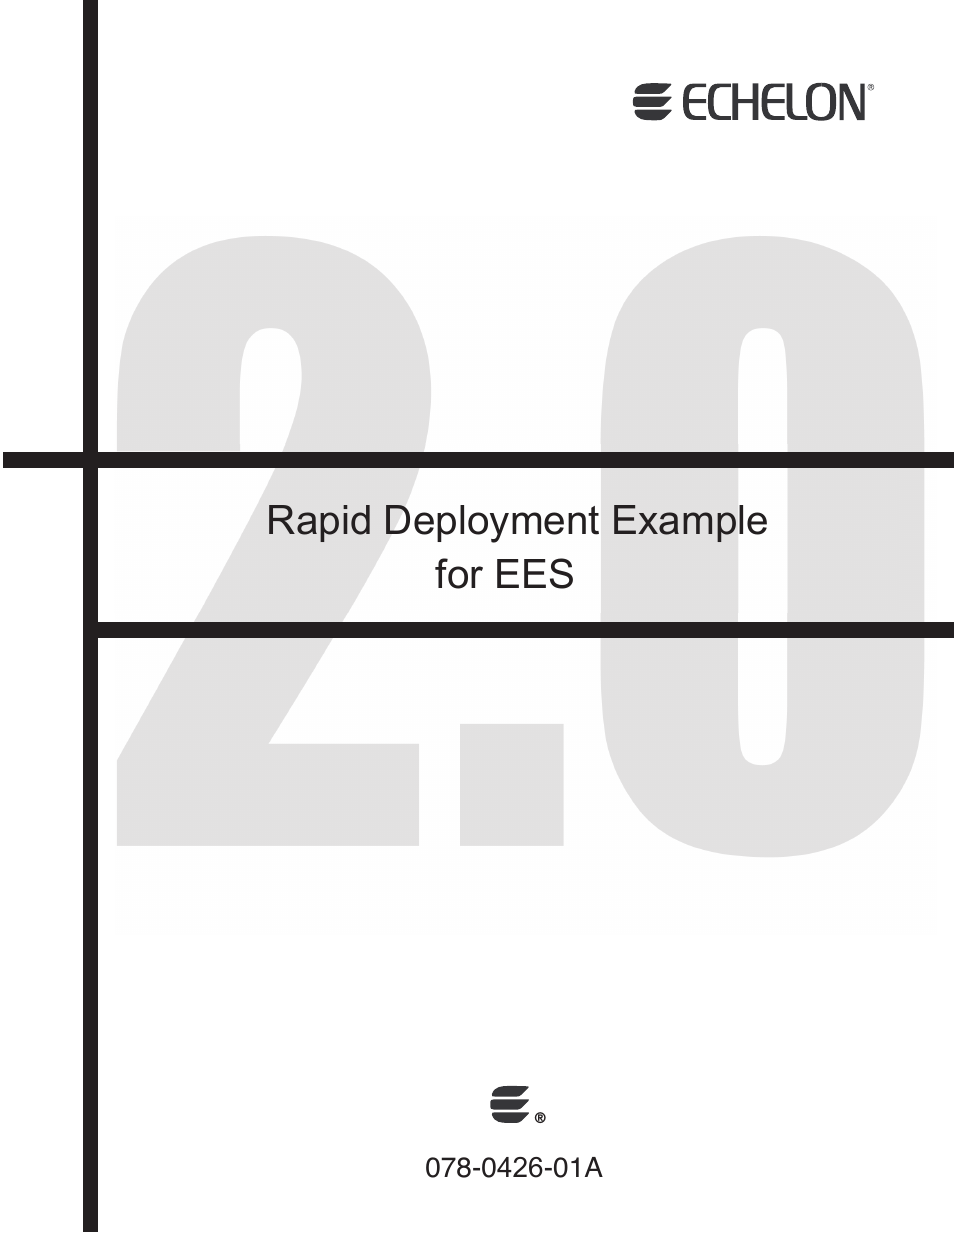 Rapid Deployment Example for EES